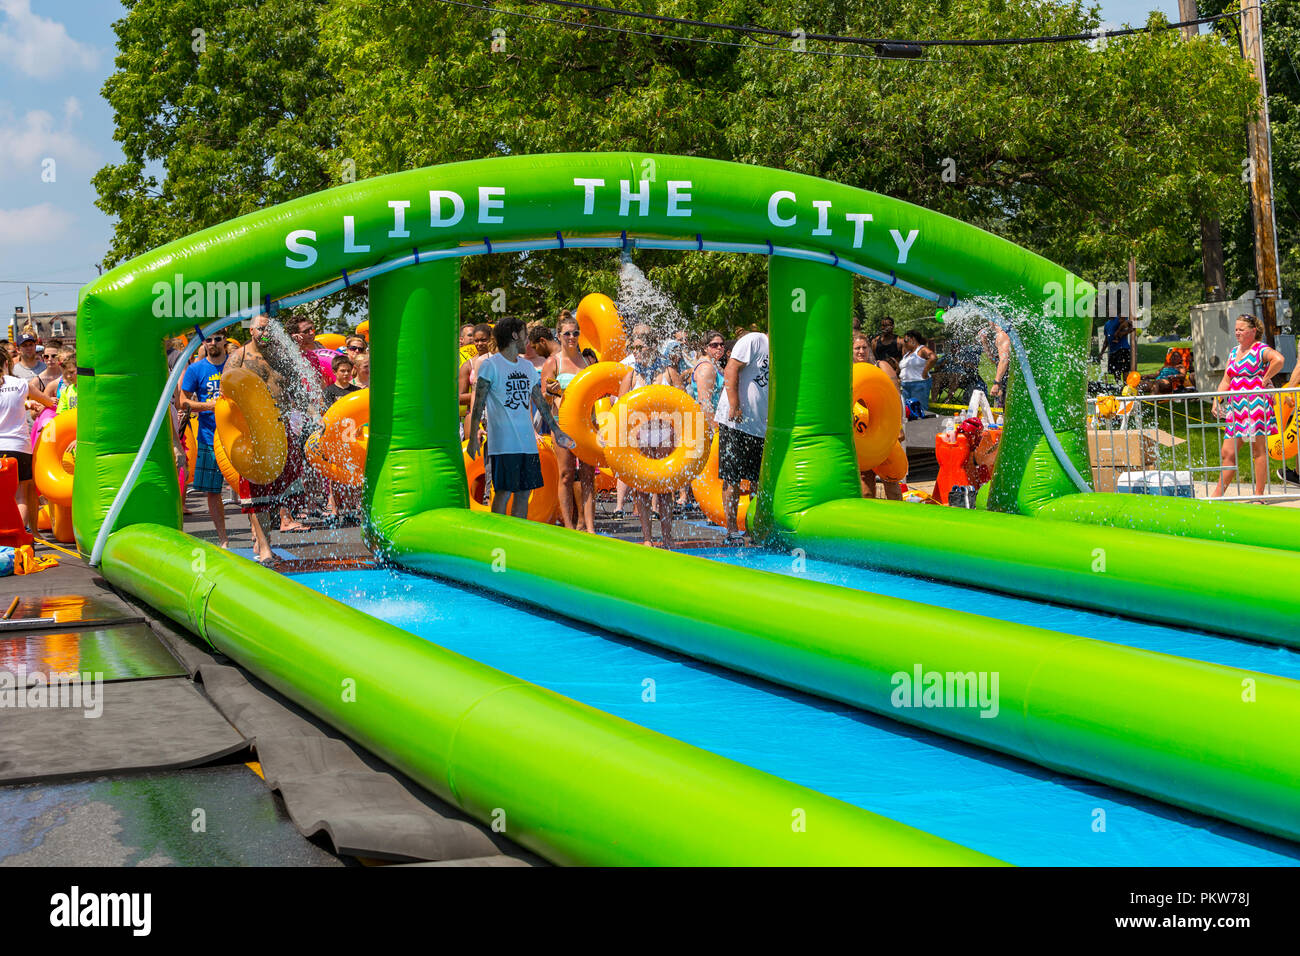 Lancaster Pa Usa July 19 2015 The Slide The City Water Party